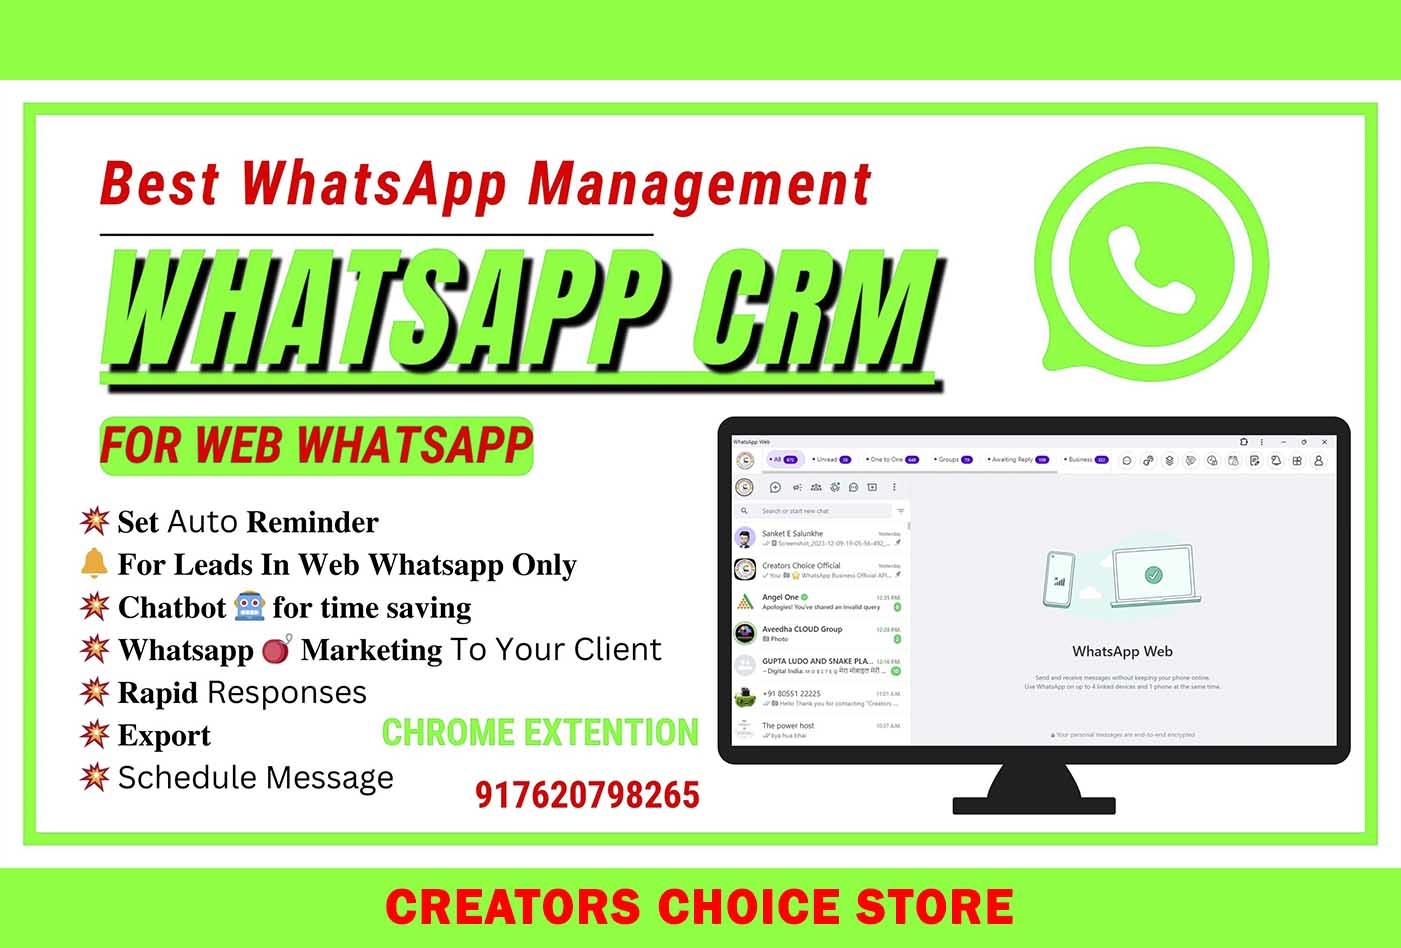 WhatsApp CRM - Auto Reminder For Leads, Bulk Message, Chatbot, Rapid Responses, Schedule